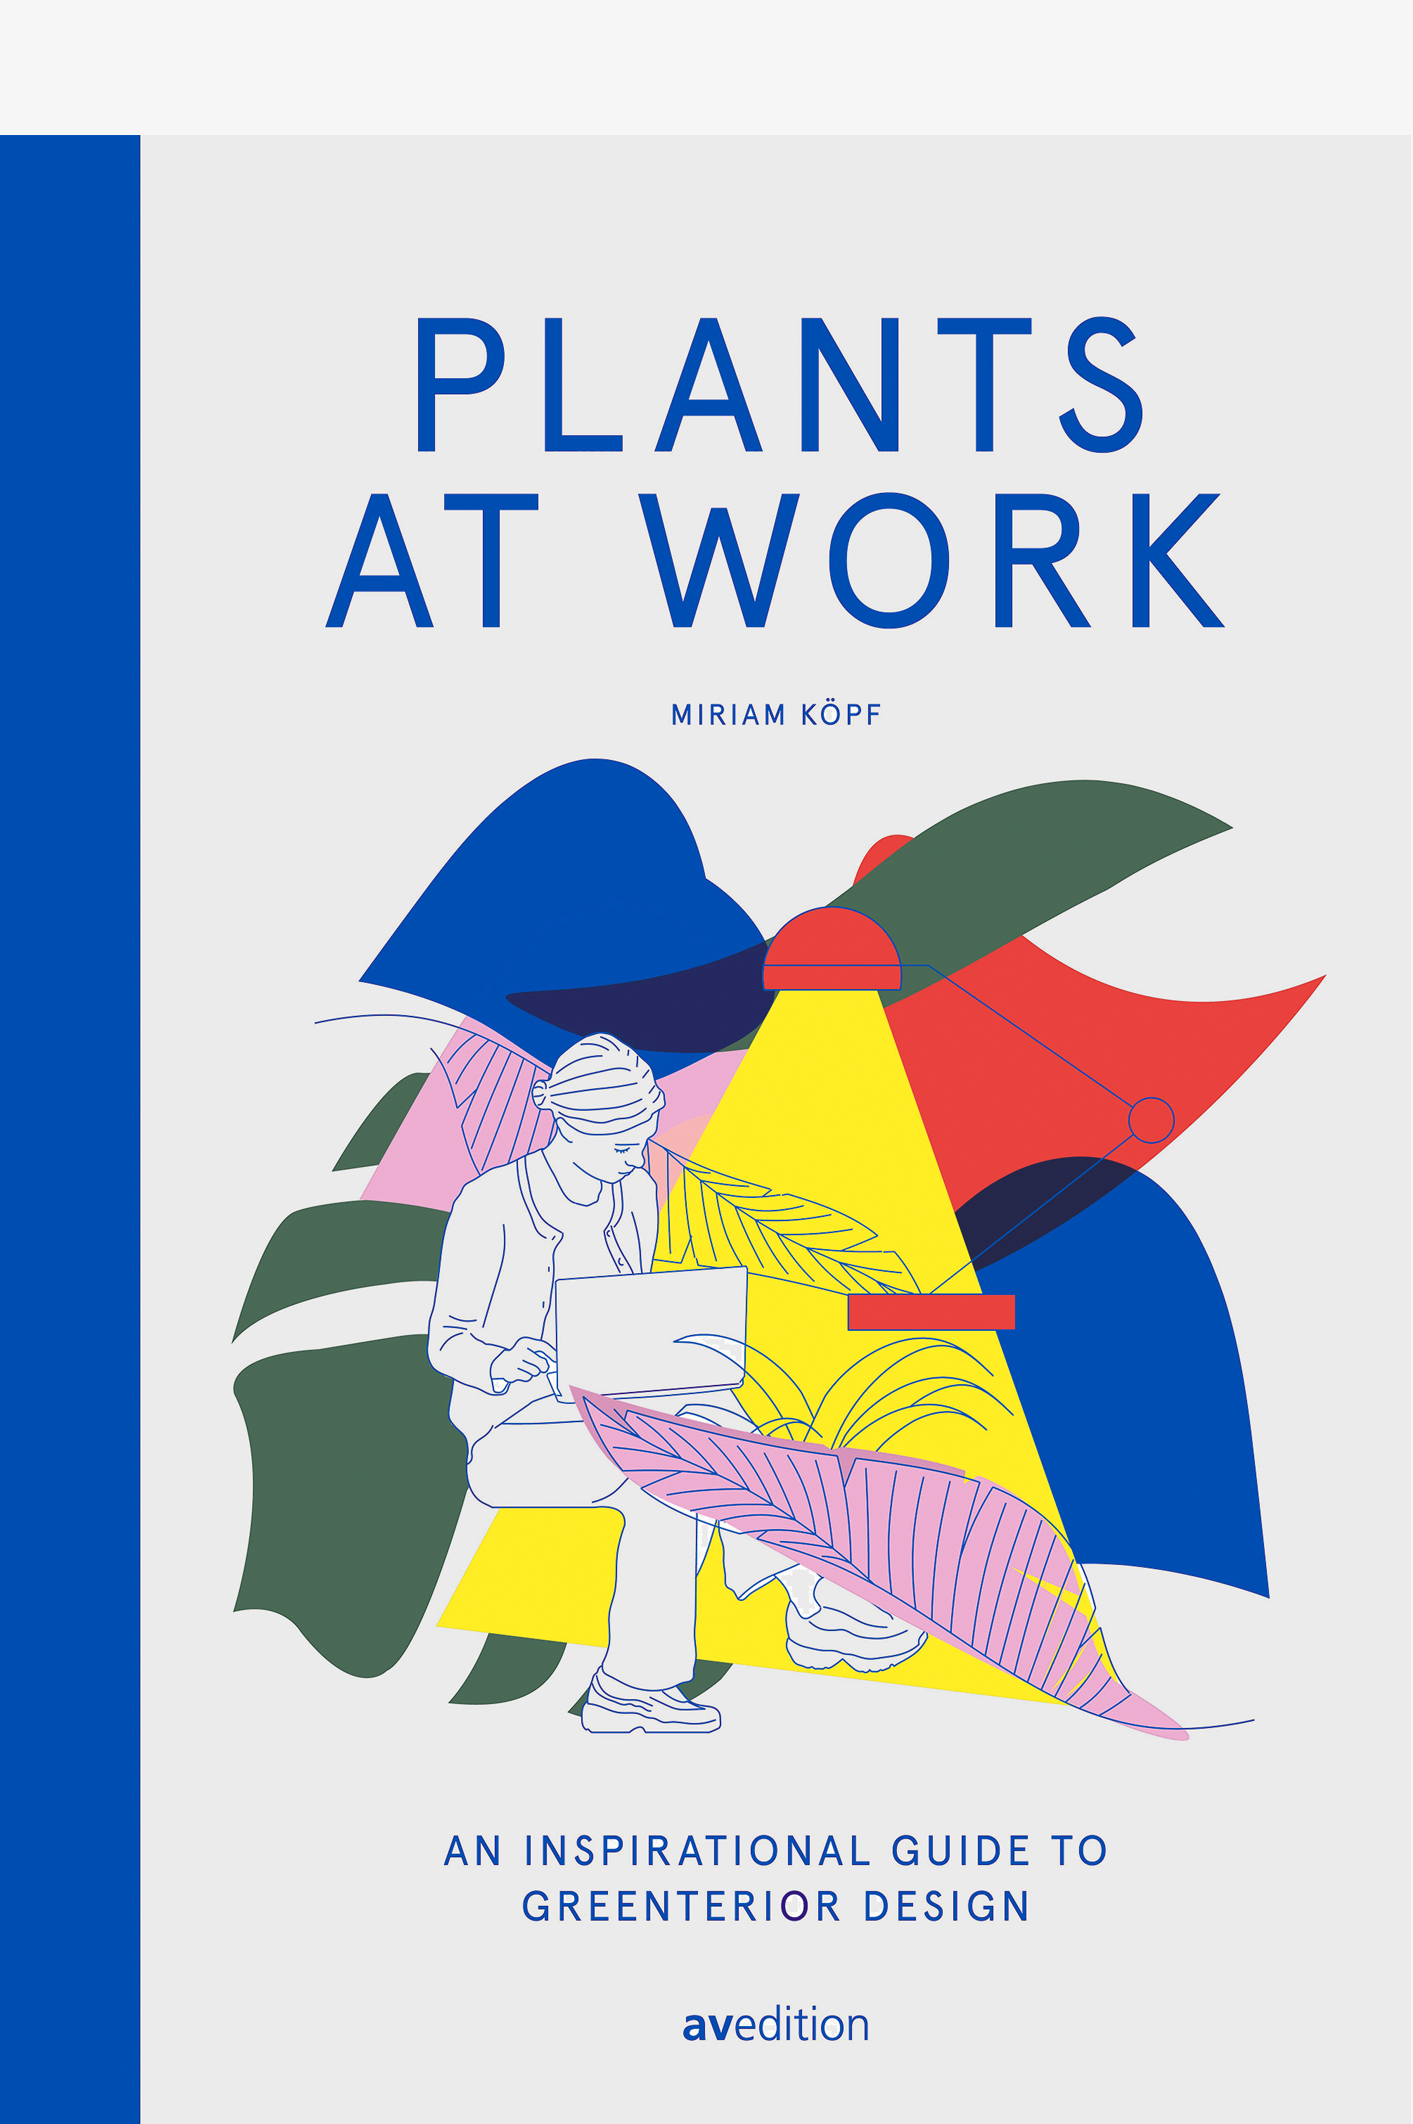 Plants at Work – An inspirational guide to greenterior design